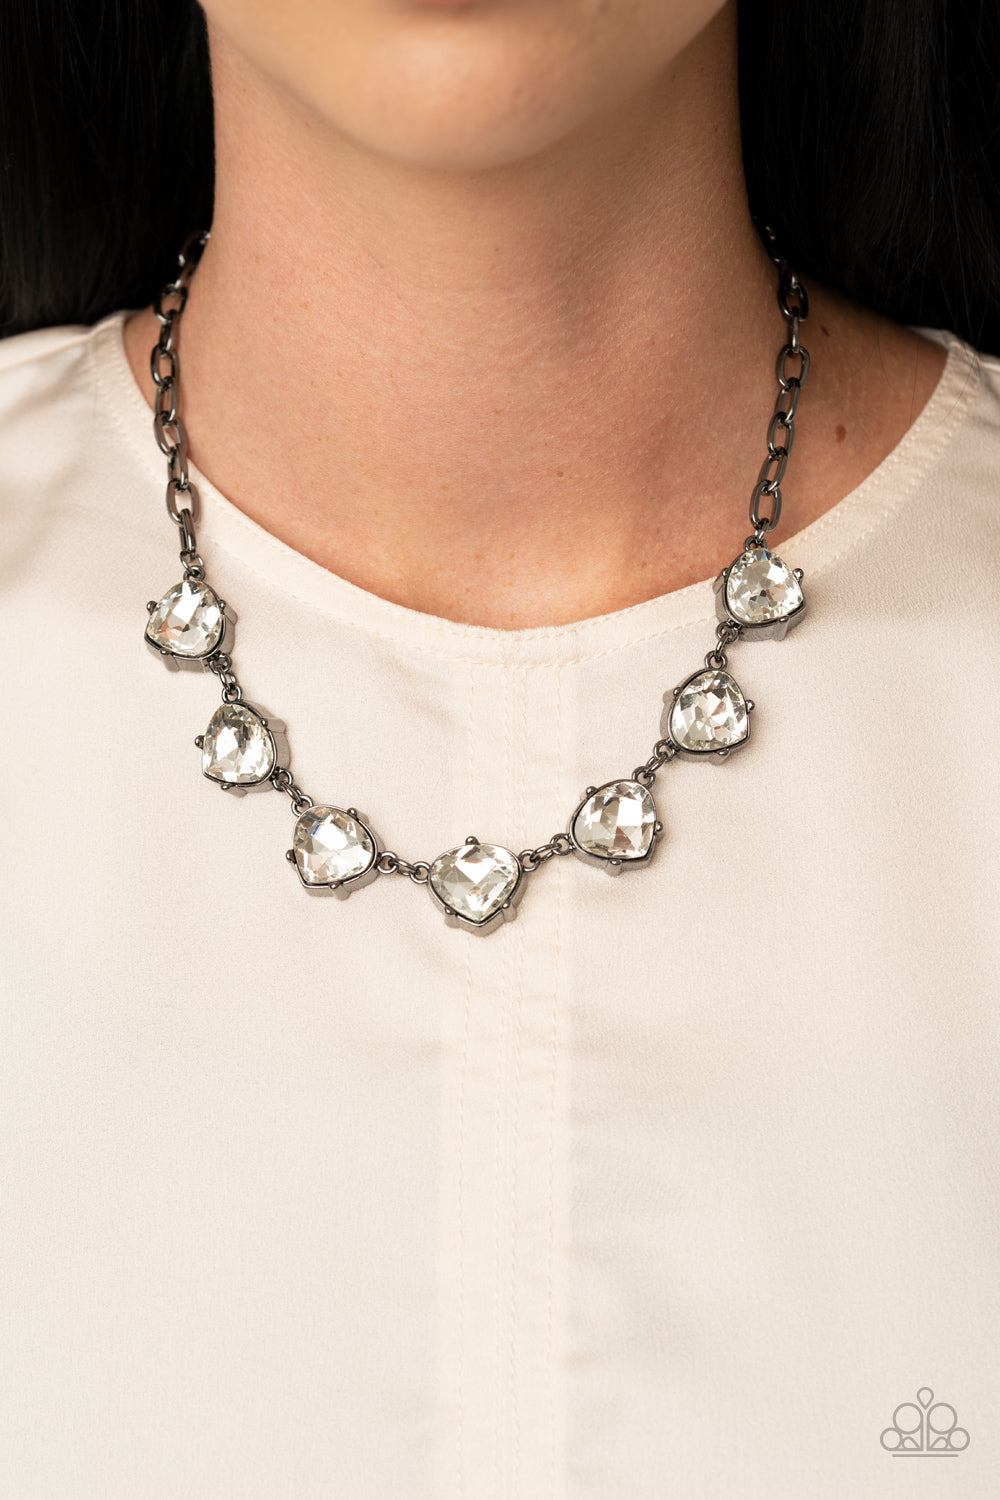 Paparazzi Star Quality Sparkle Gunmetal Rhinestone Necklace - December 2020 Life Of The Party Exclusive - A Finishing Touch 